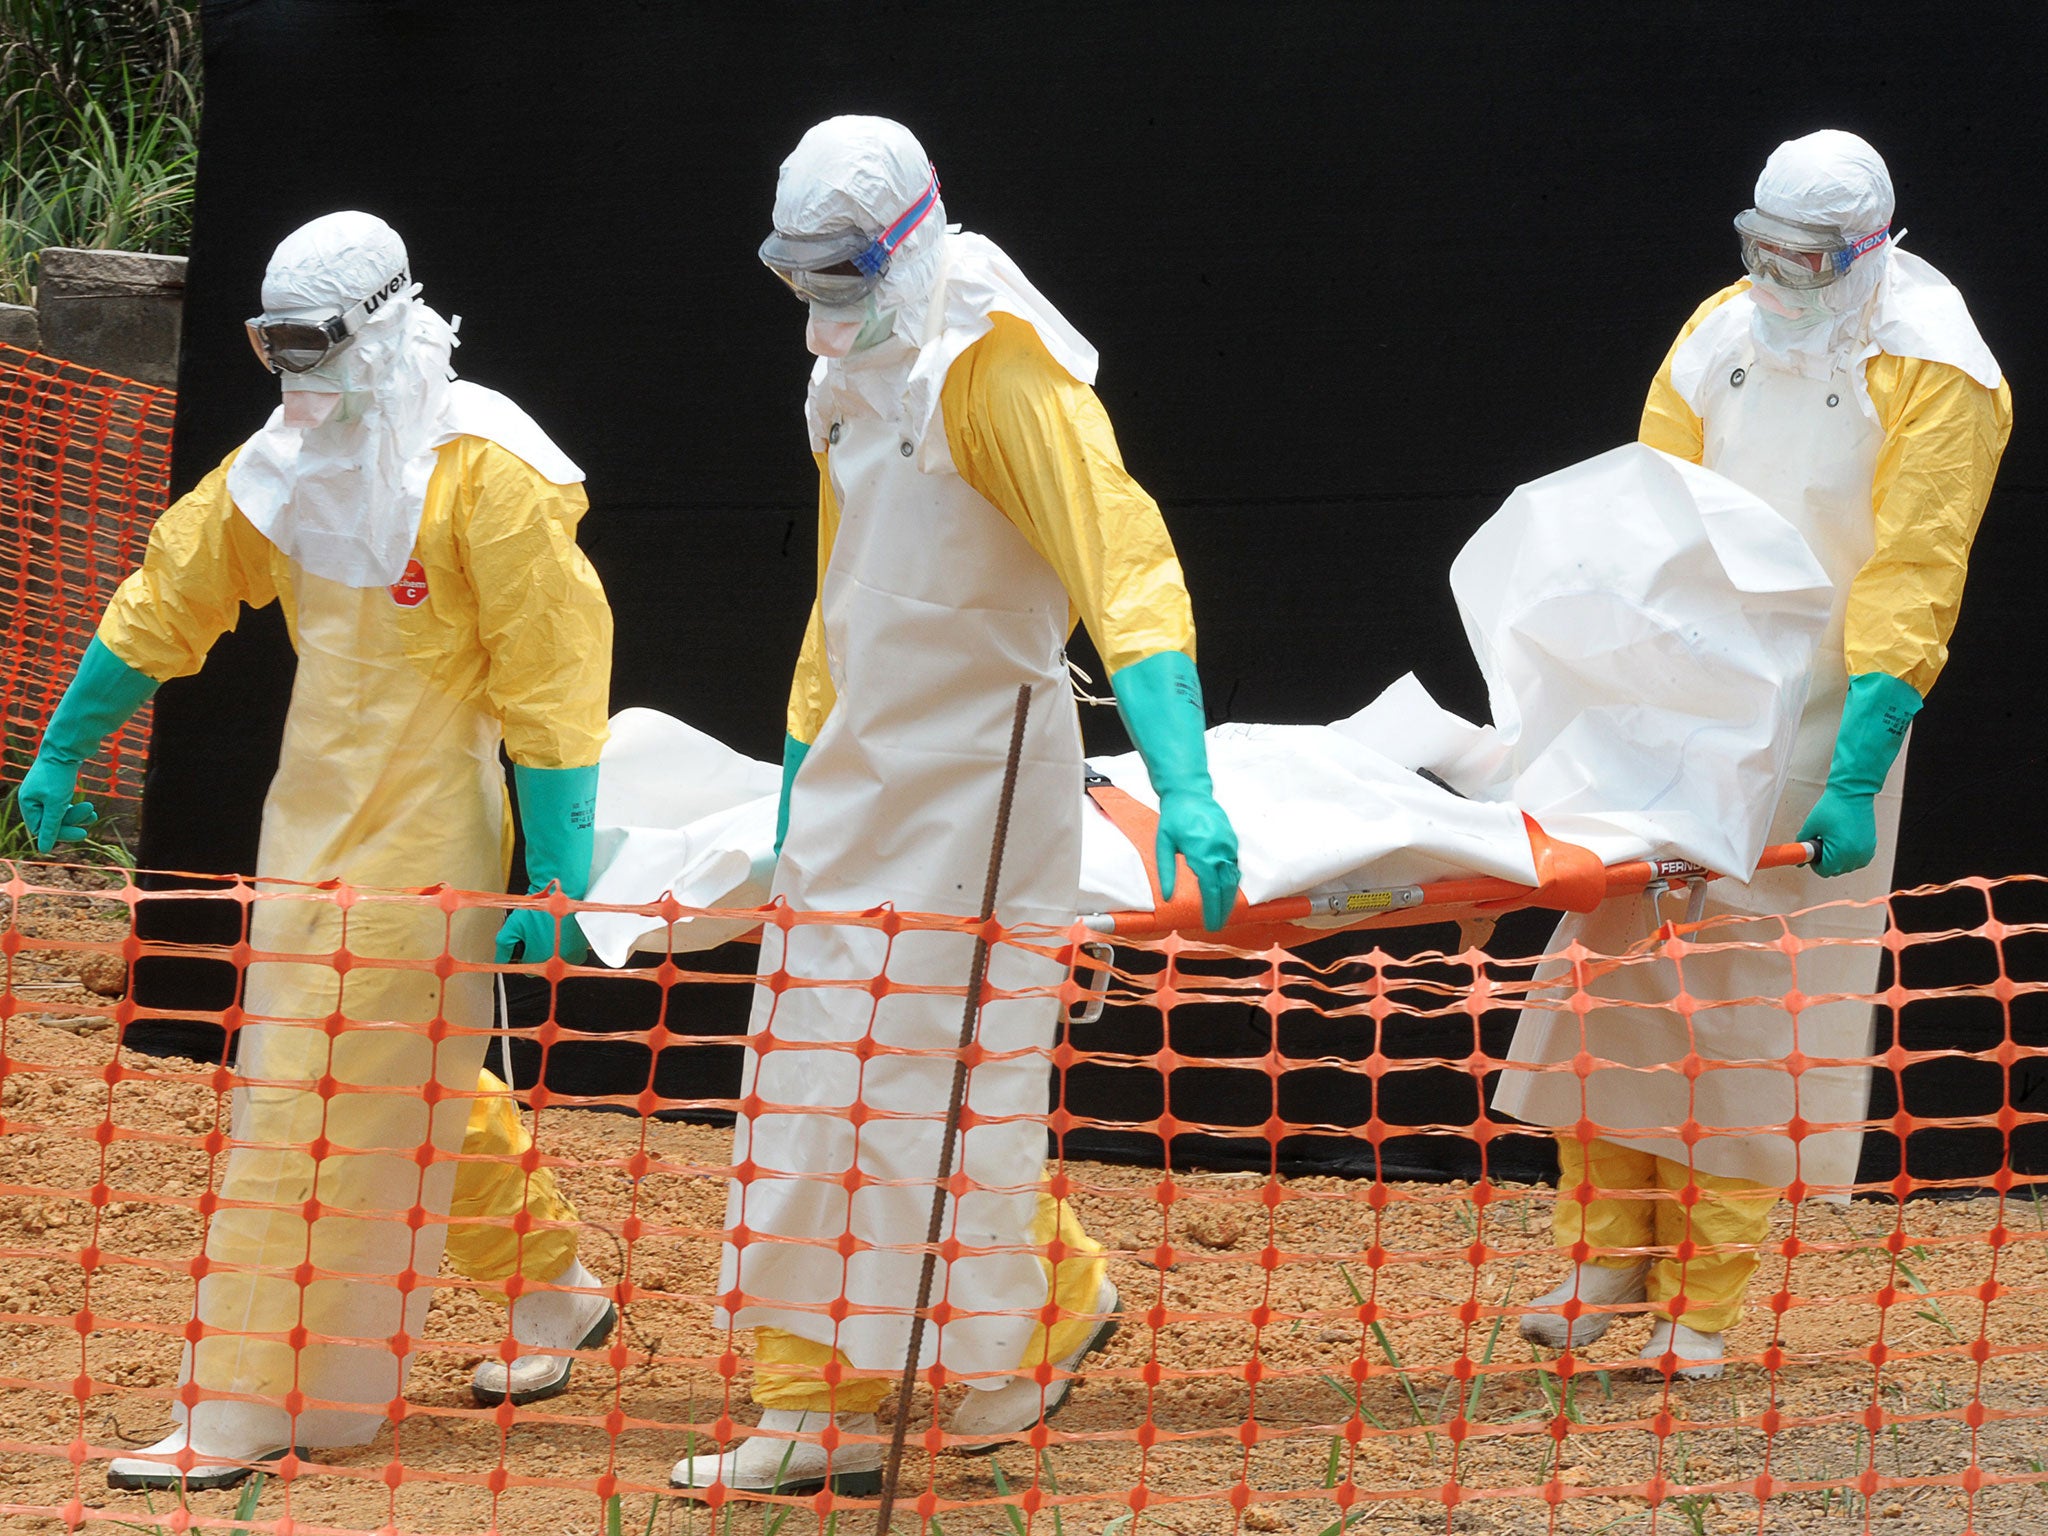 Staff of 'Médecins sans frontières' carry the body of a person killed by viral haemorrhagic fever, at a center for victims of the Ebola virus in Guekedou, on April 1, 2014.